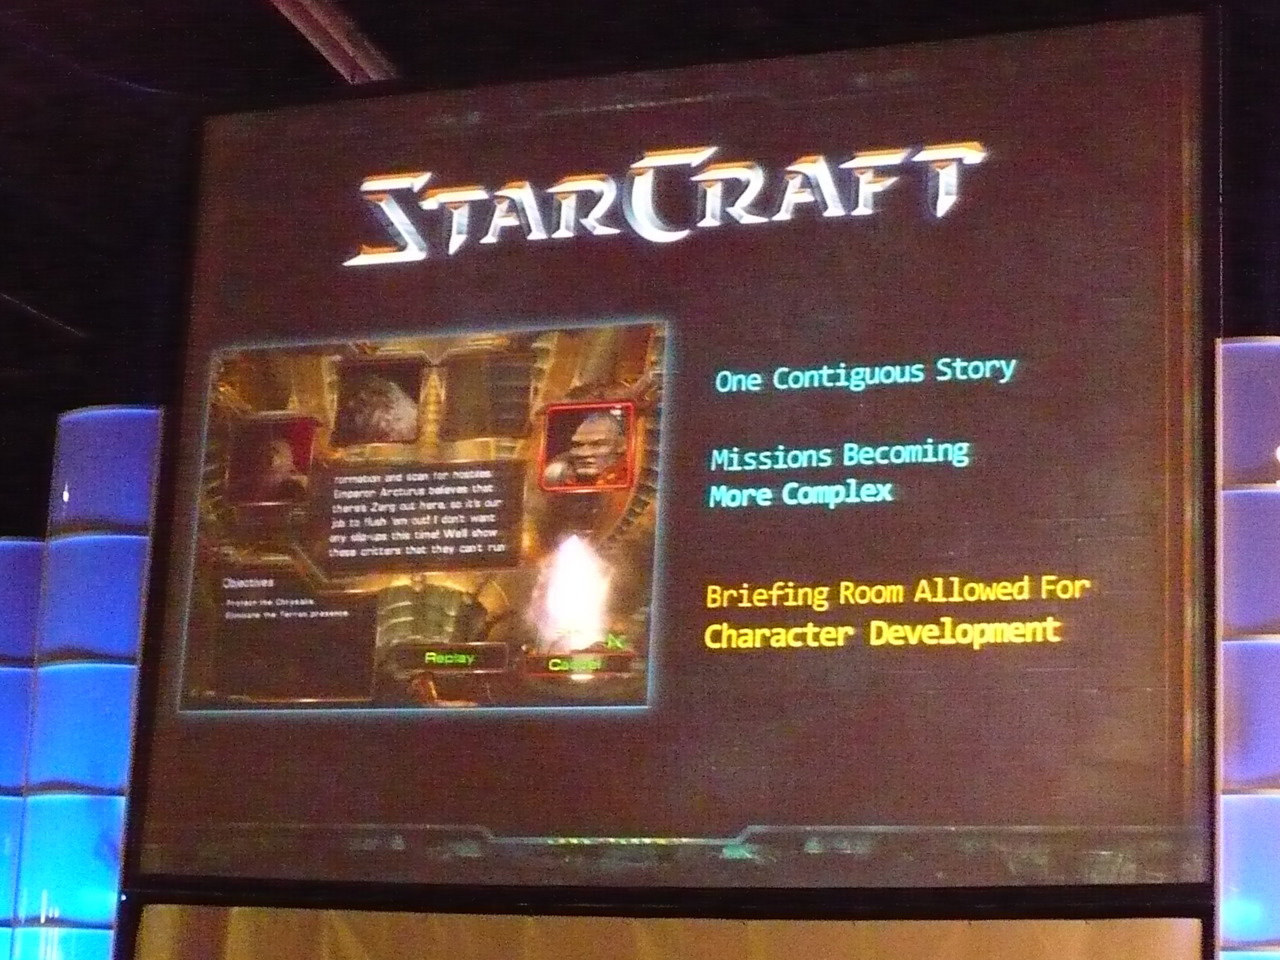 An overview of StarCraft's storytelling.